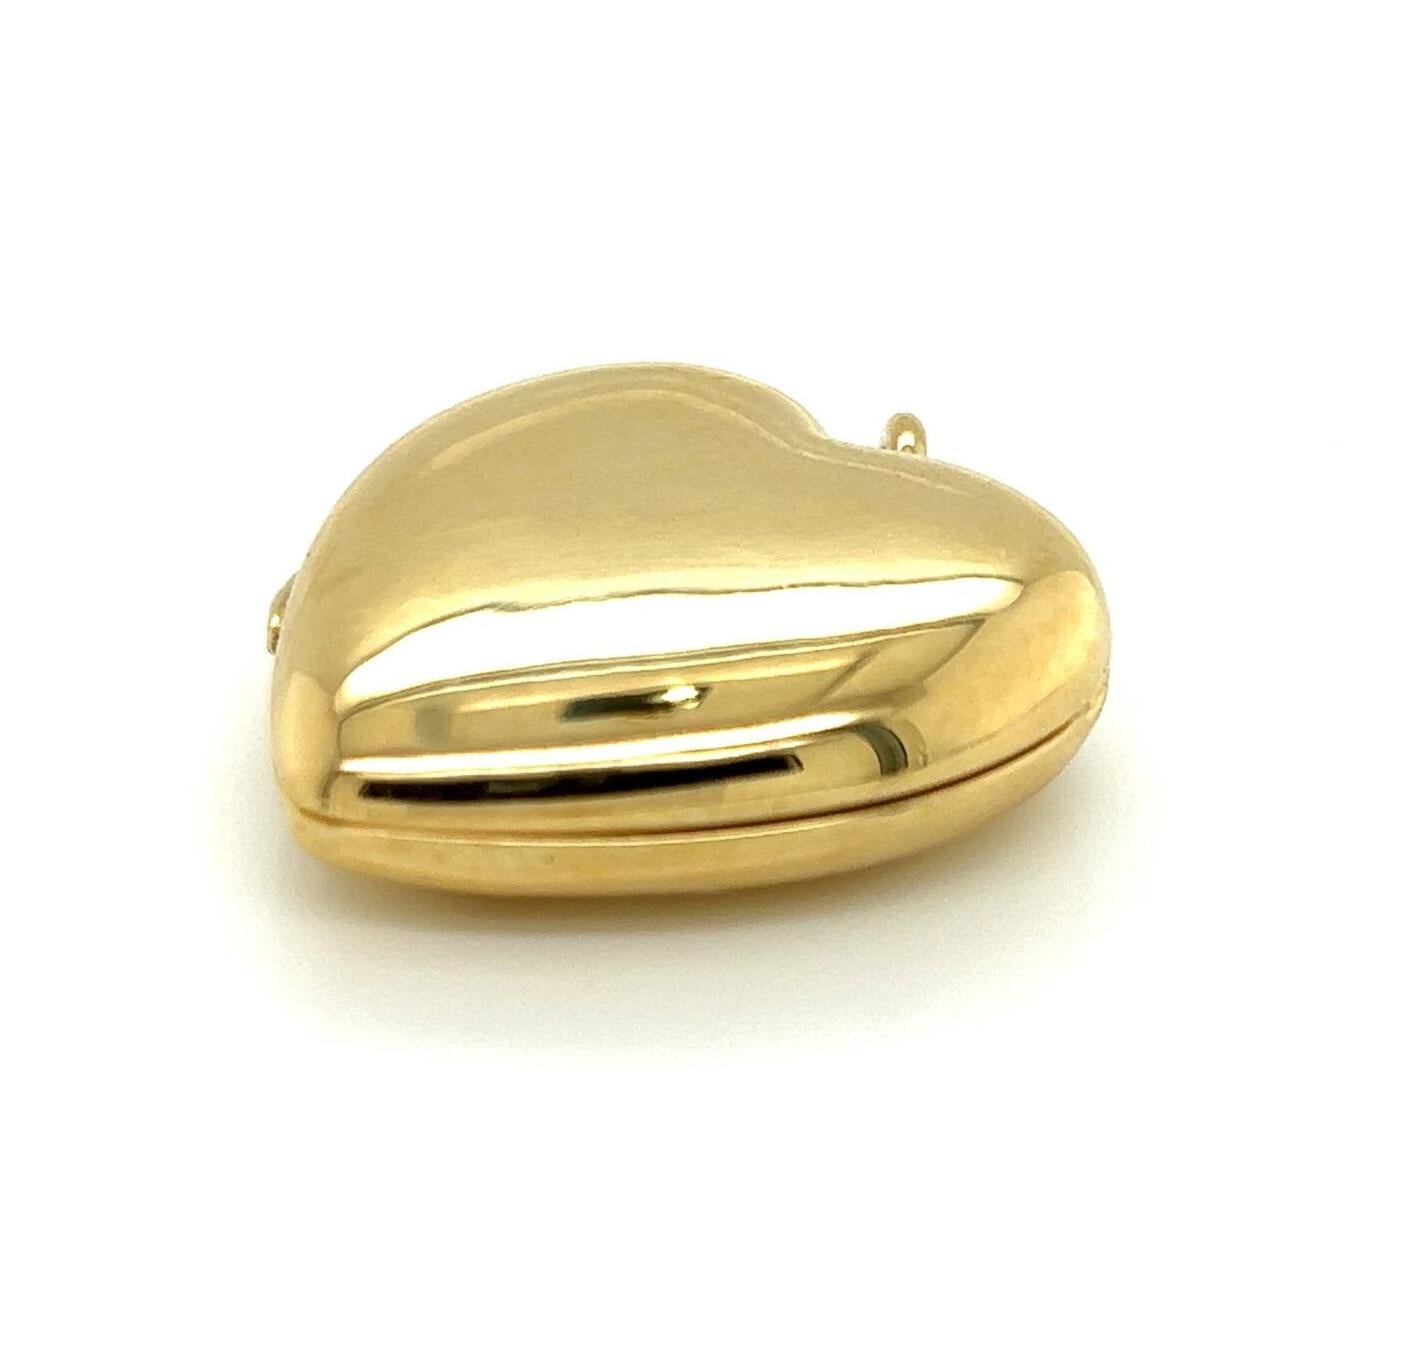 This keepsake authentic vintage locket pendant is from Tiffany & Co., crafted from 14k yellow gold with a polished finish featuring a double side frame heart shape hinged pendant. It opens to reveal a double heart shape frame with a snap shut clasp.